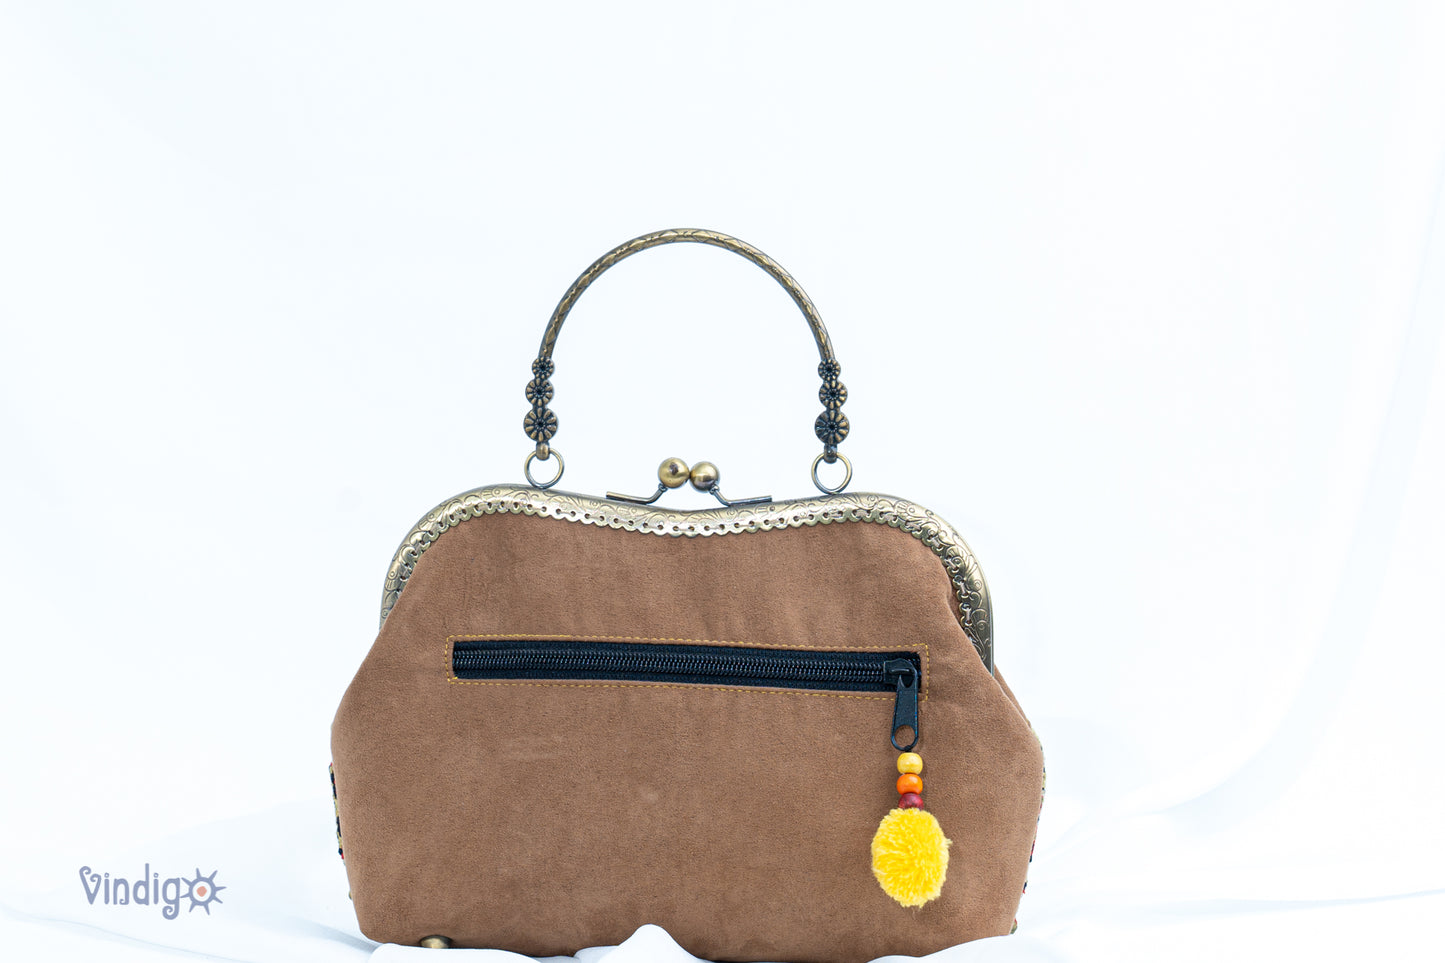 Suede leather bag with vintage tribal embroidery and copper-binding